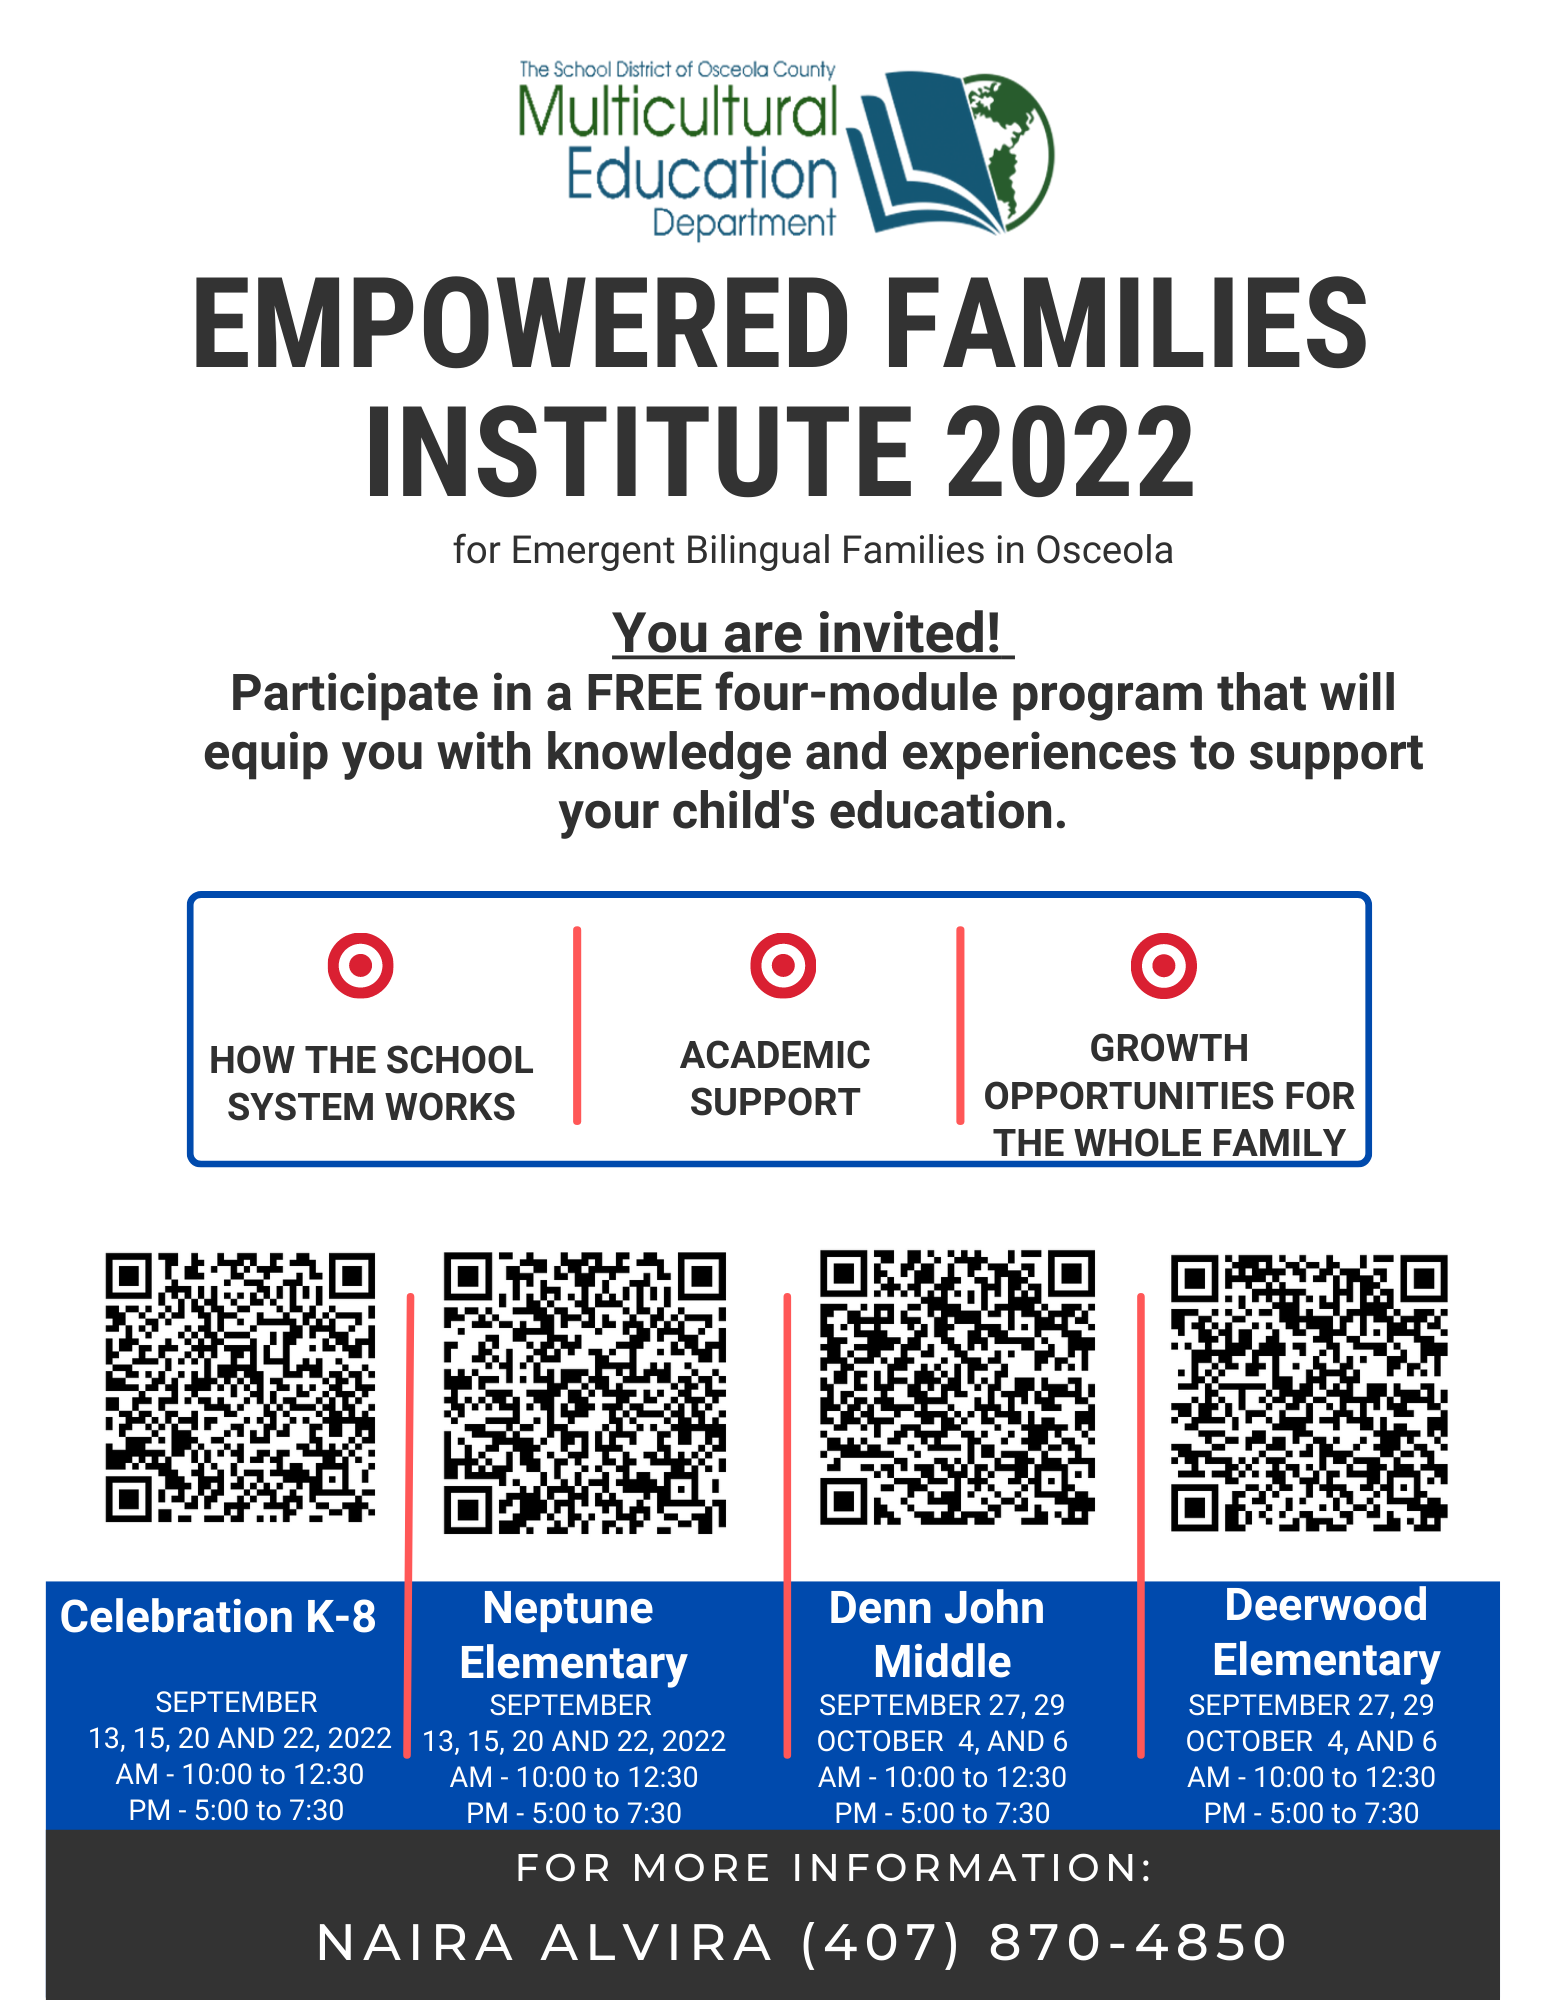 Empowered Families Institue 2022